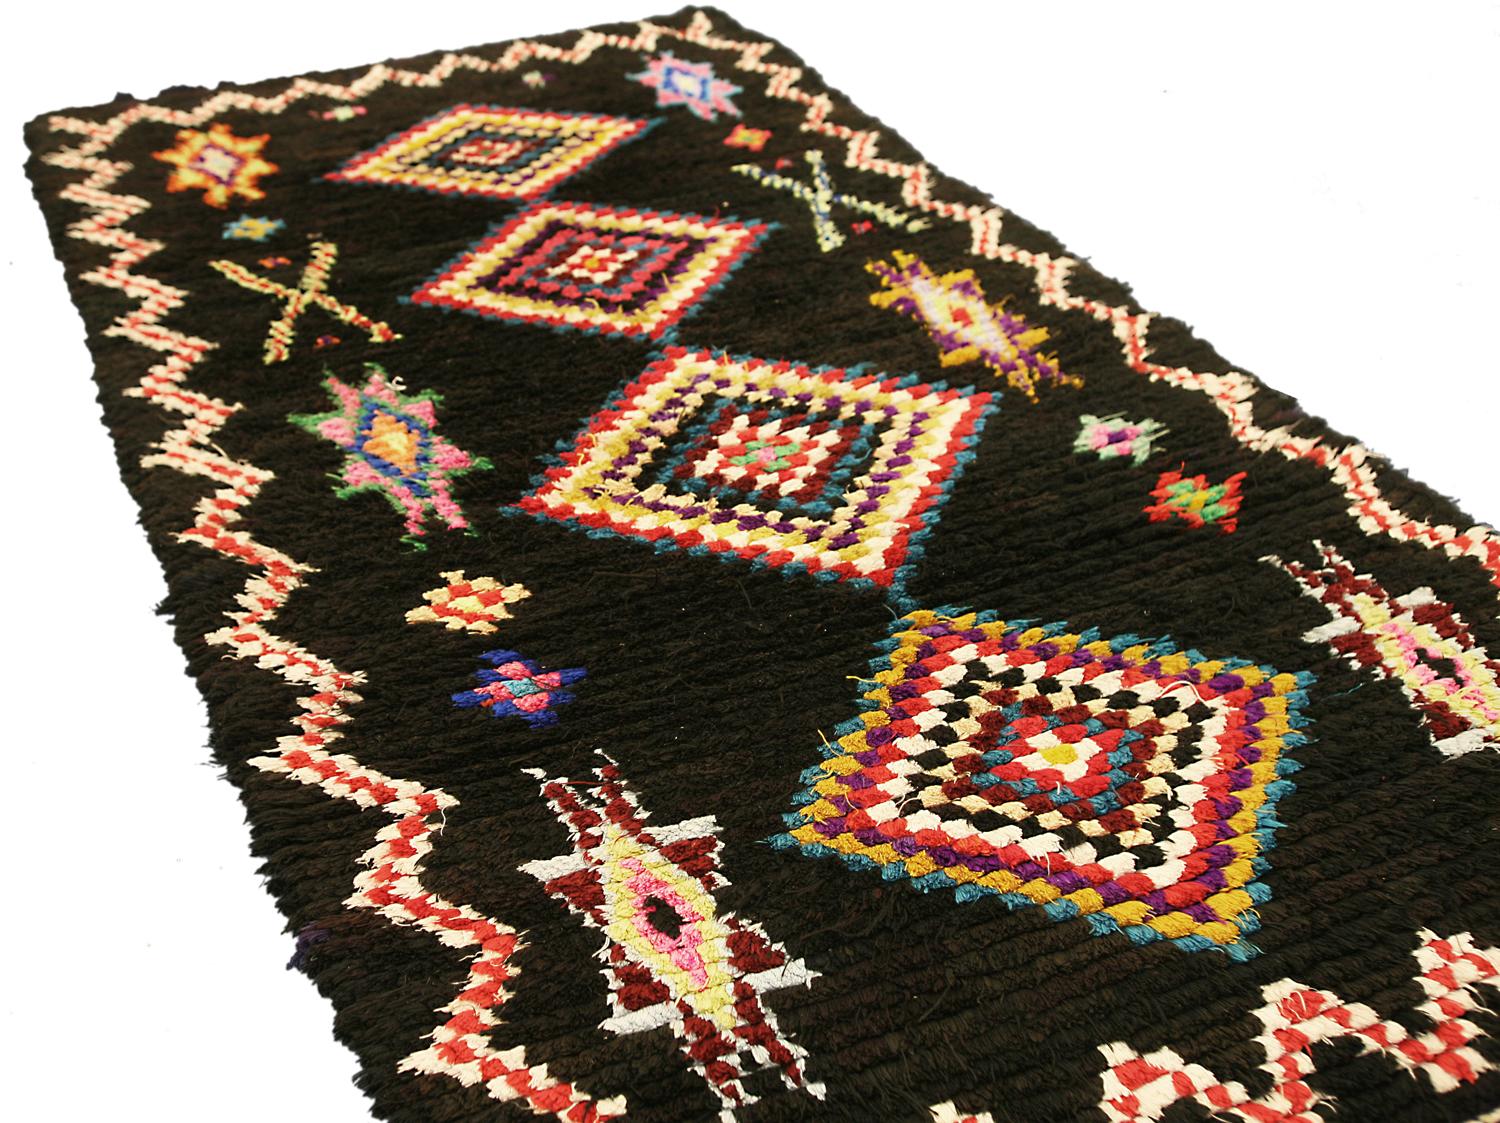 This is a semi-antique Moroccan Marrakesh rug woven circa 1950 and measures 176 x 91cm in size. This rug design incorporates four polychrome-colored center medallions flanked by star motifs set on a deep dark black background color. its main border